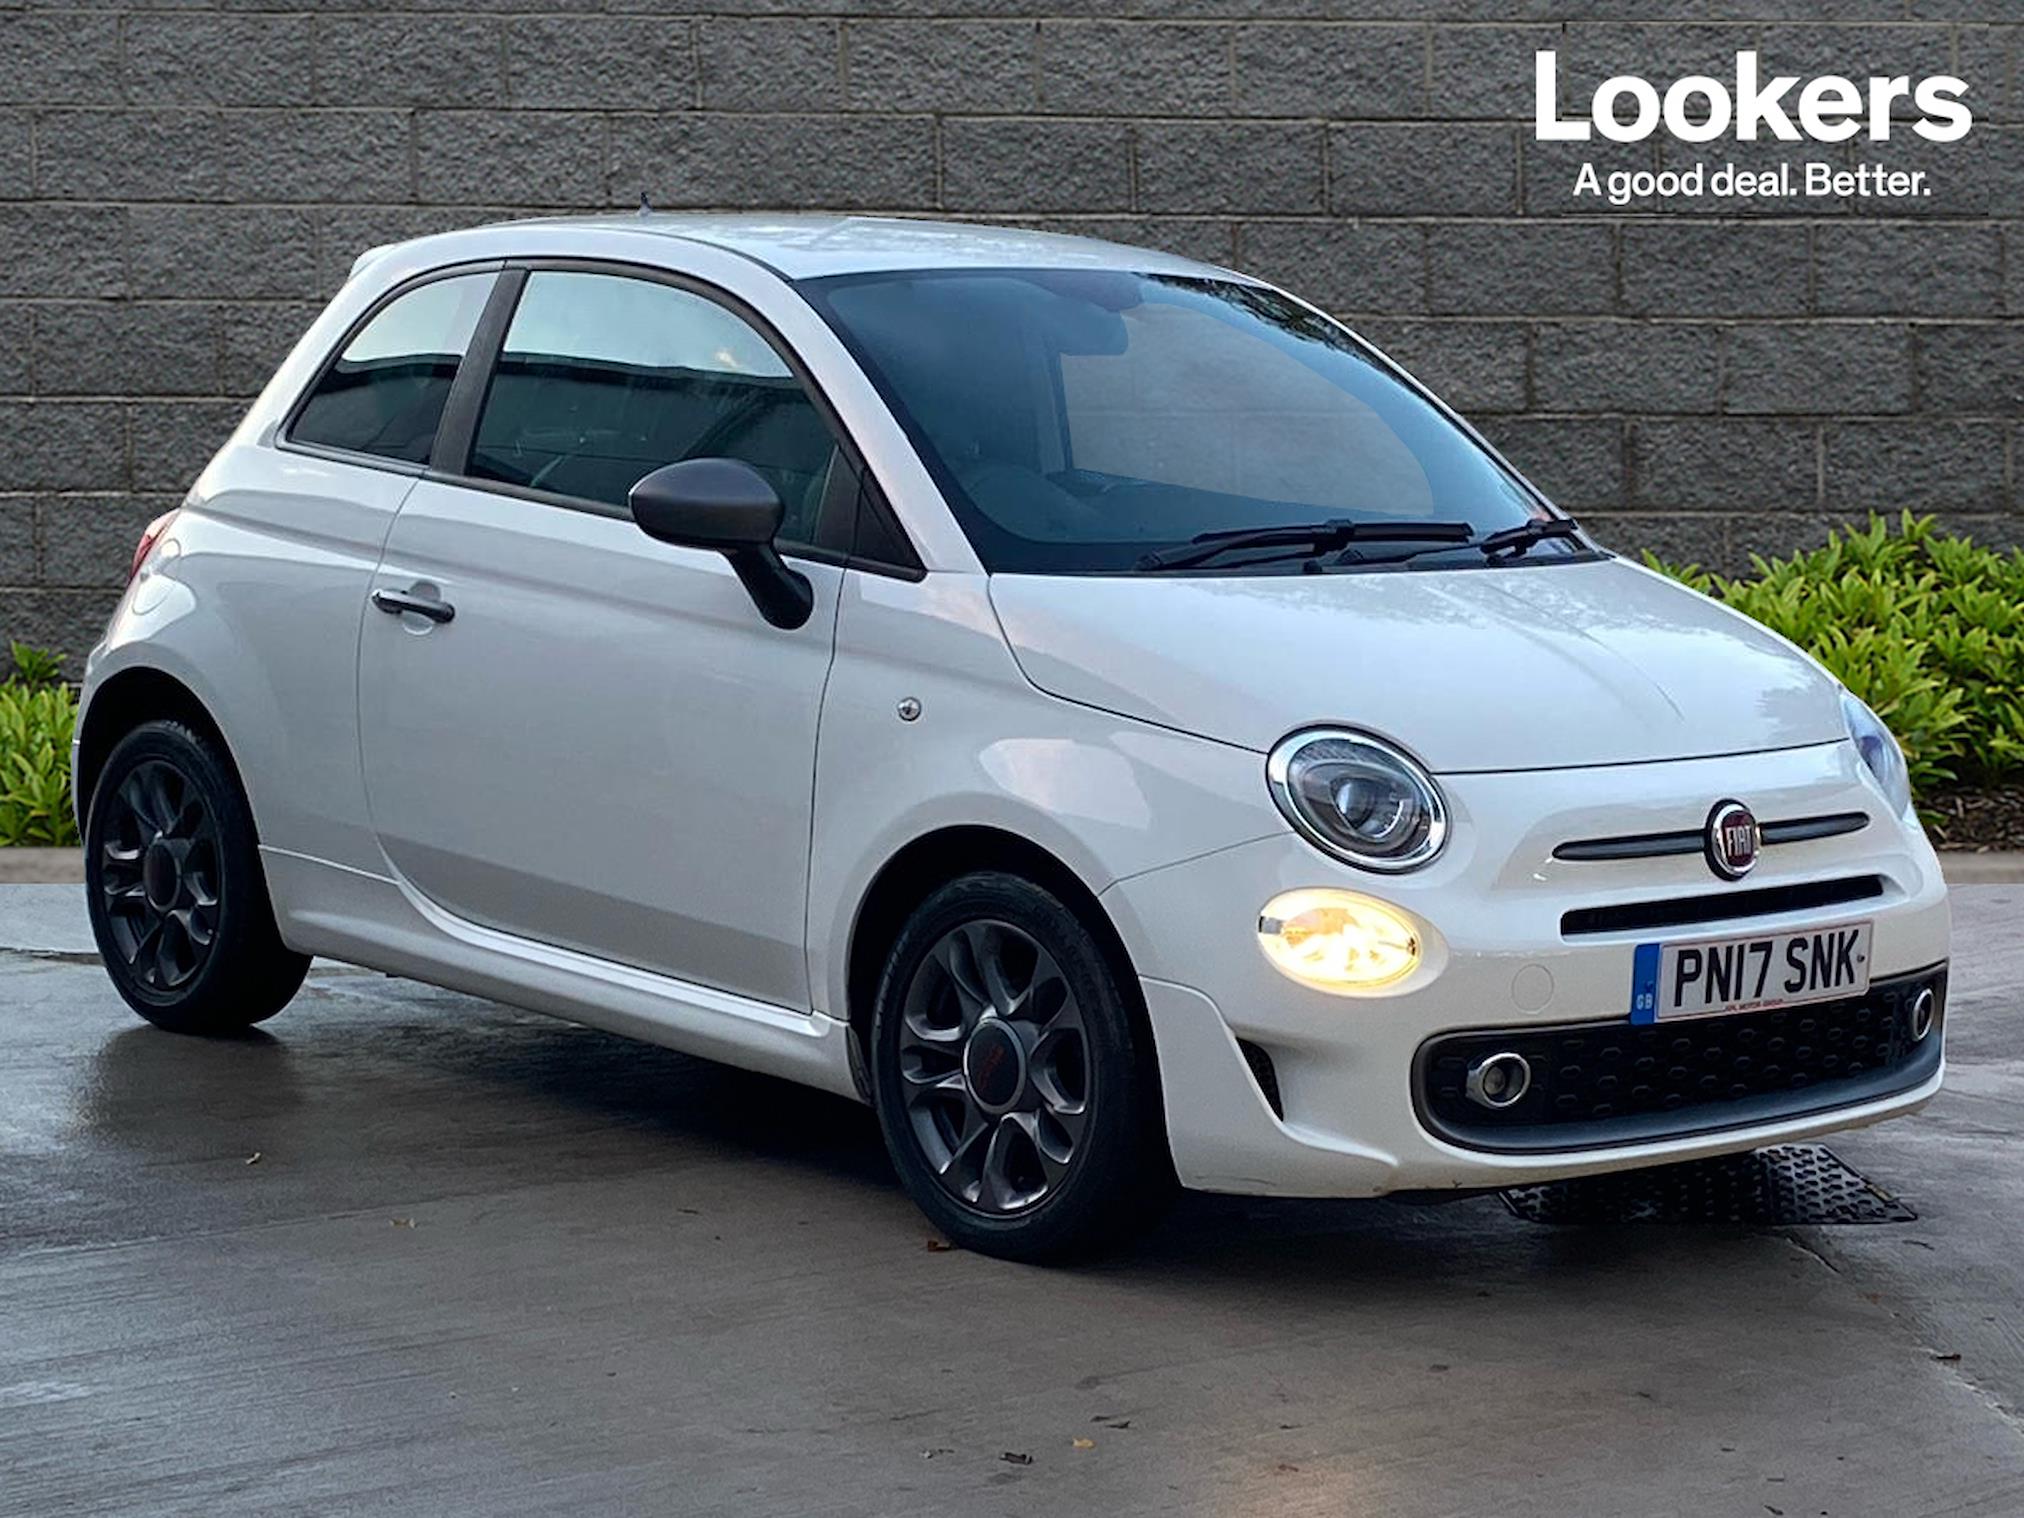 Used FIAT 500 1.2 S 3Dr 2017 | Lookers